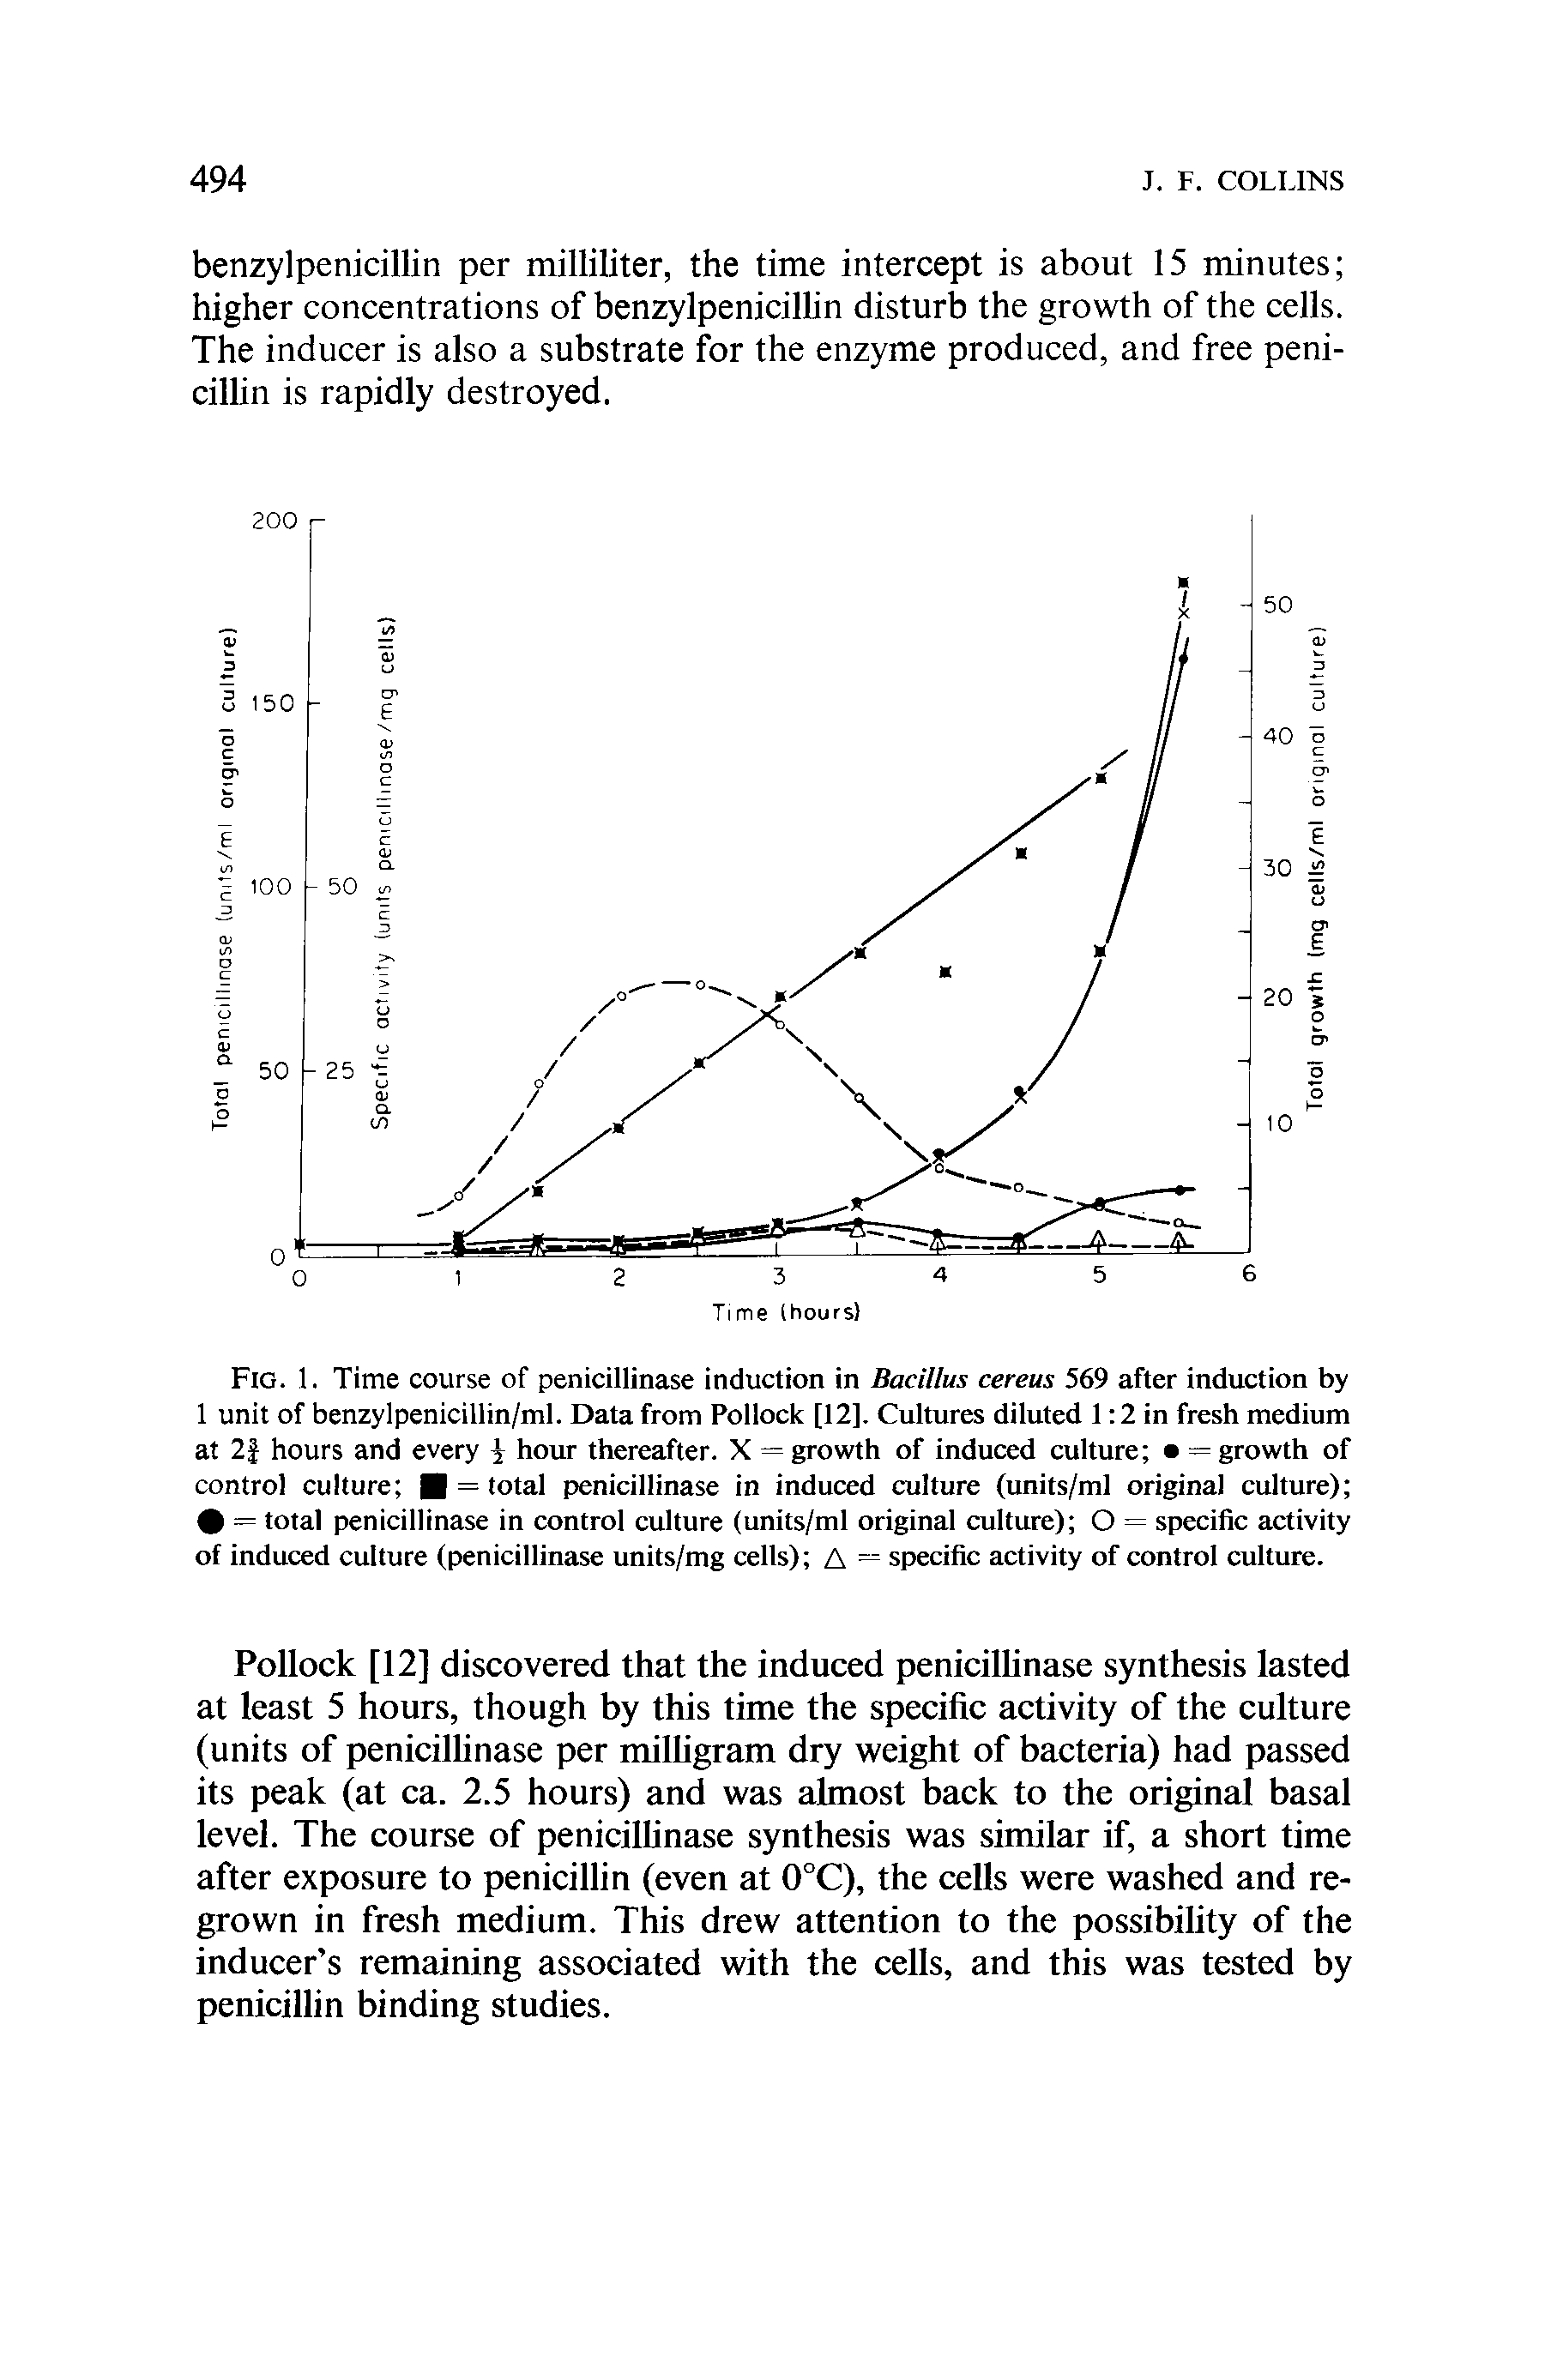 Fig. 1. Time course of penicillinase induction in Bacillus cereus 569 after induction by 1 unit of benzylpenicillin/ml. Data from Pollock [12]. Cultures diluted 1 2 in fresh medium at 2 hours and every i hour thereafter. X = growth of induced culture = growth of control culture = total penicillinase in induced culture (units/ml original culture) = total penicillinase in control culture (units/ml original culture) O = specific activity of induced culture (penicillinase units/mg cells) A = specific activity of control culture.